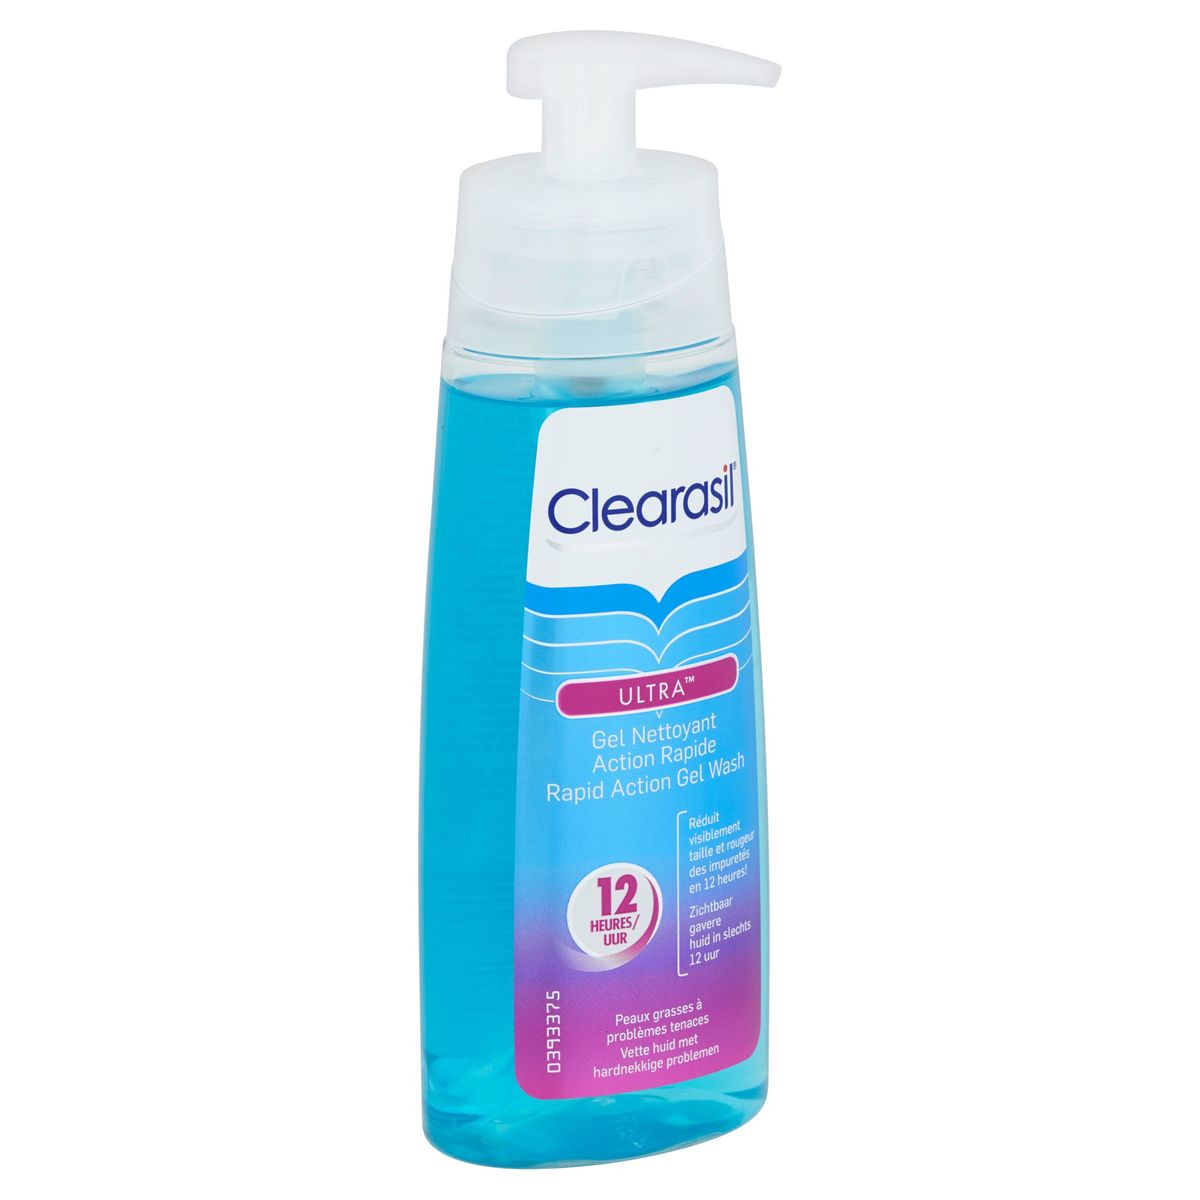 Clearasil Ultra Gel Nettoyant Action Rapide 200 ml